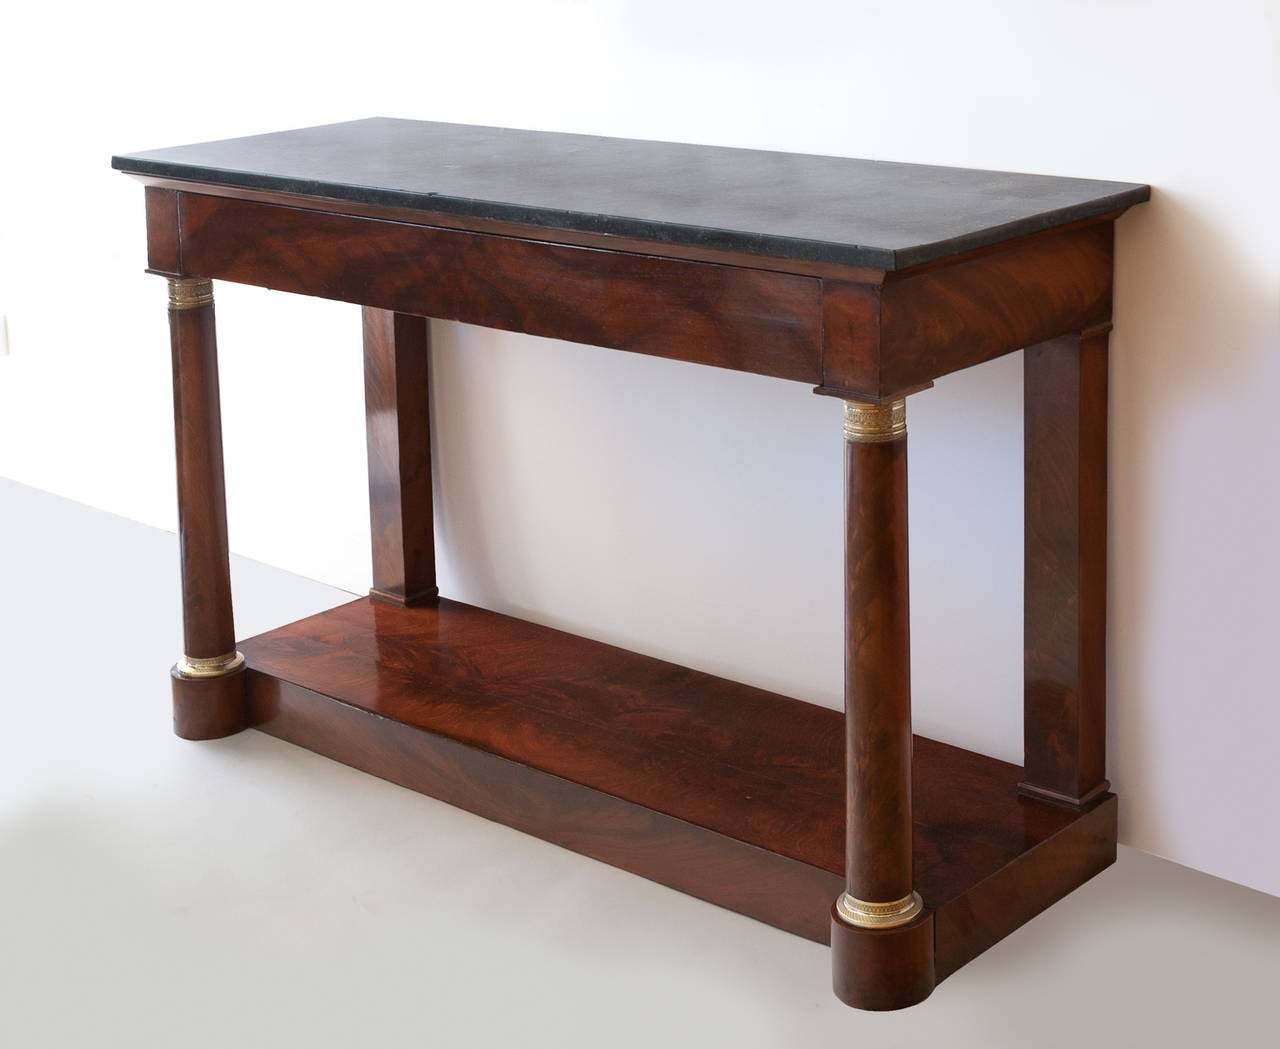 Mahogany and mahogany veneer. Black fossil marble top over one long drawer. Gilt bronze mounts. France c. 1810. Some slight lifting on the veneer, see photographs.